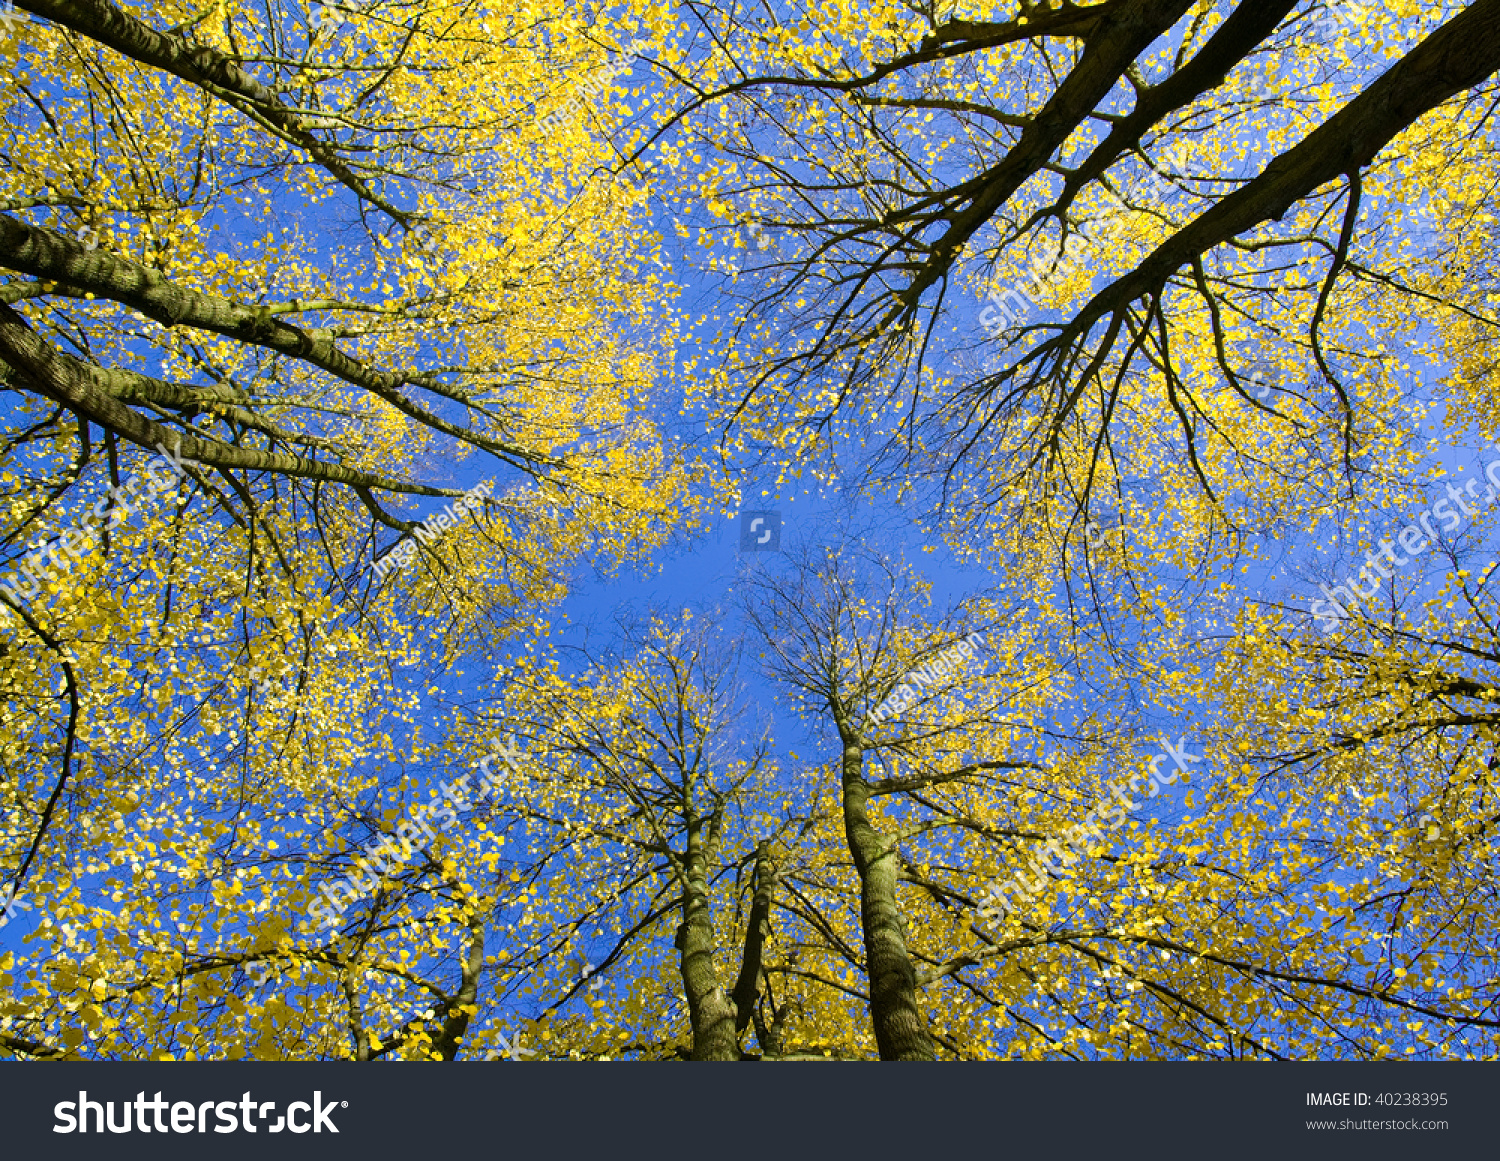 Upward view of autumn trees with yellow leaves against blue sky #40238395